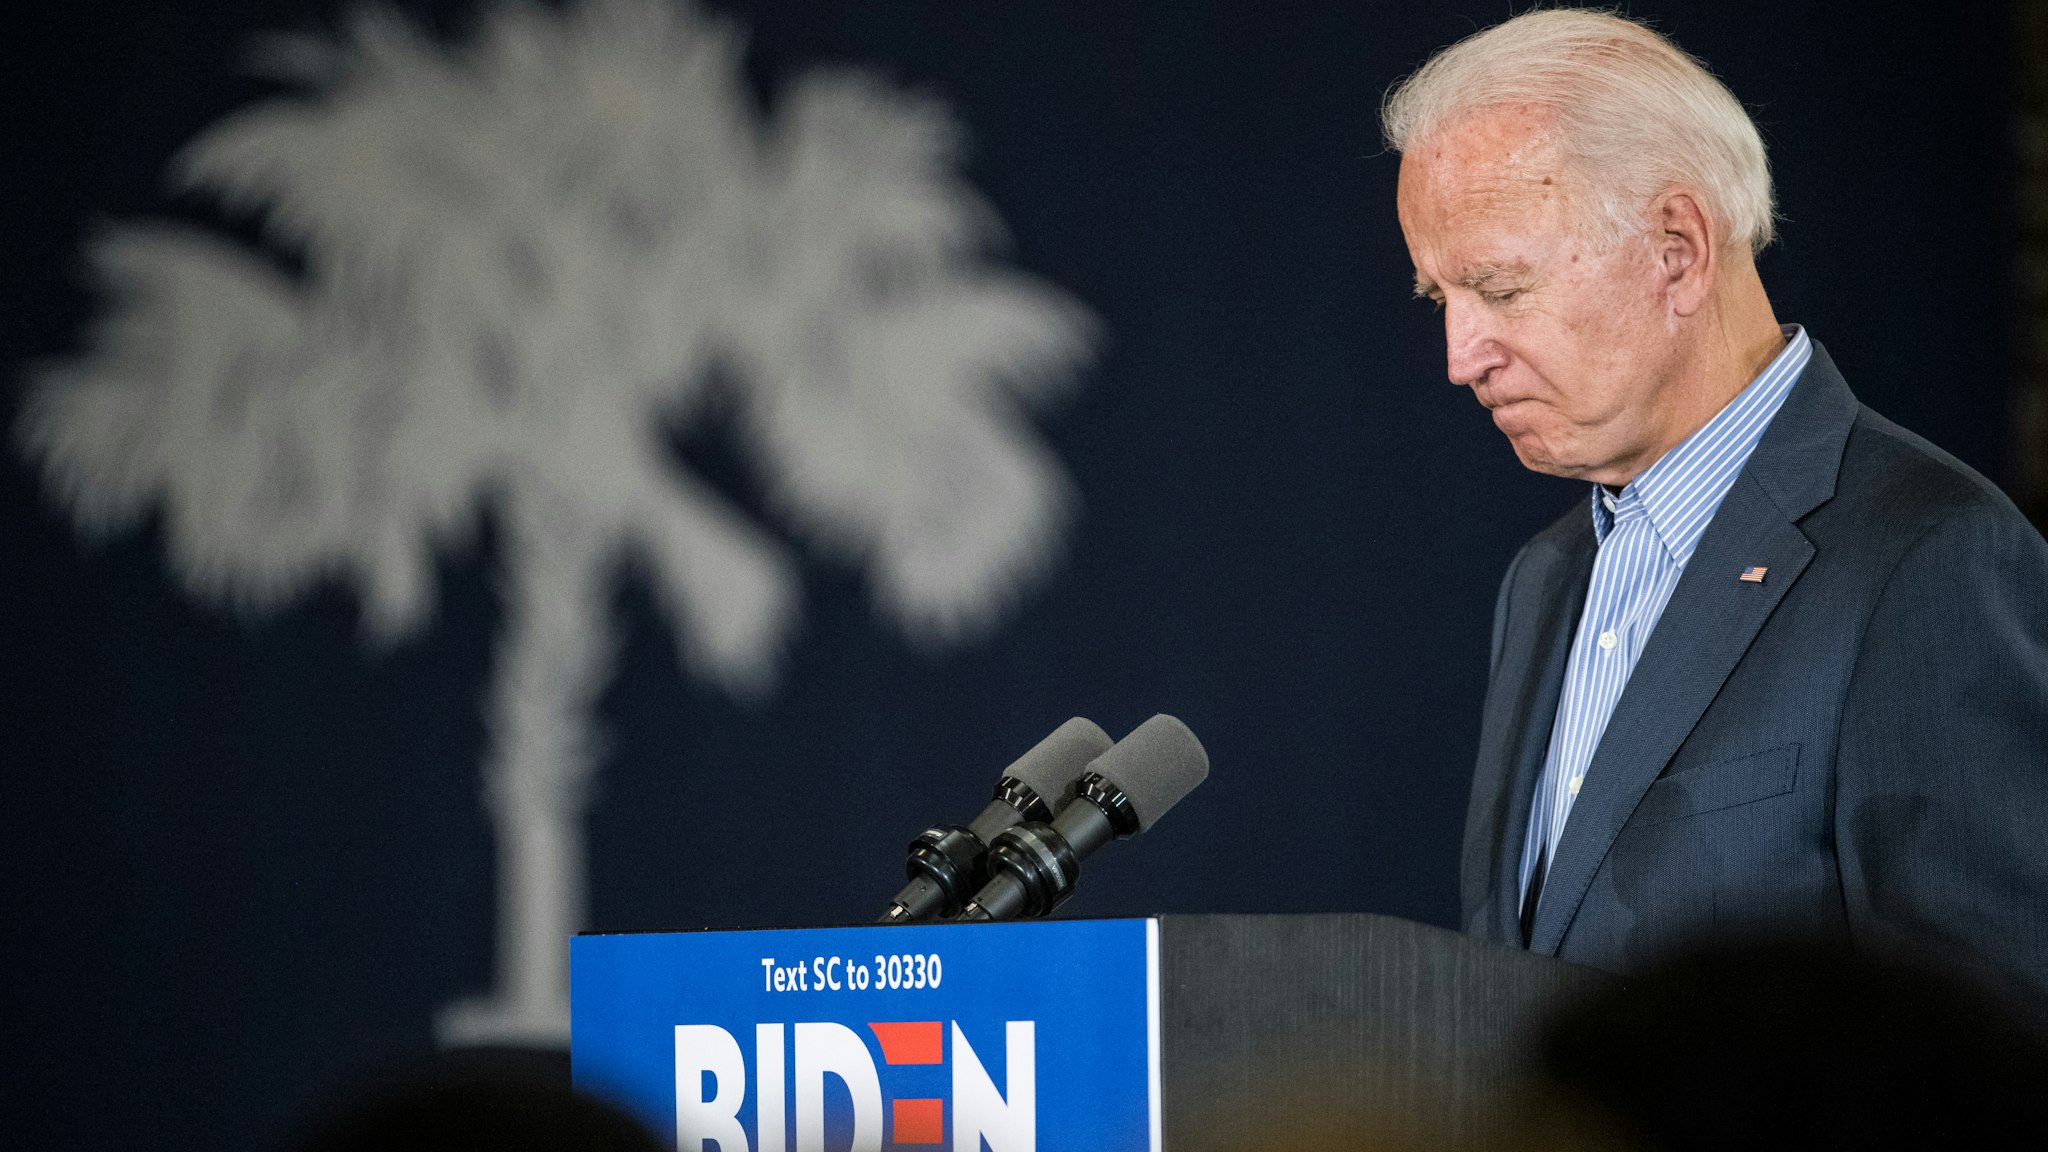 Democratic presidential candidate, former vice President Joe Biden addresses a crowd at Wilson High School on October 26, 2019 in Florence, South Carolina. Many presidential hopefuls campaigned in the early primary state over the weekend, scheduling stops around a criminal justice forum in the state capital.